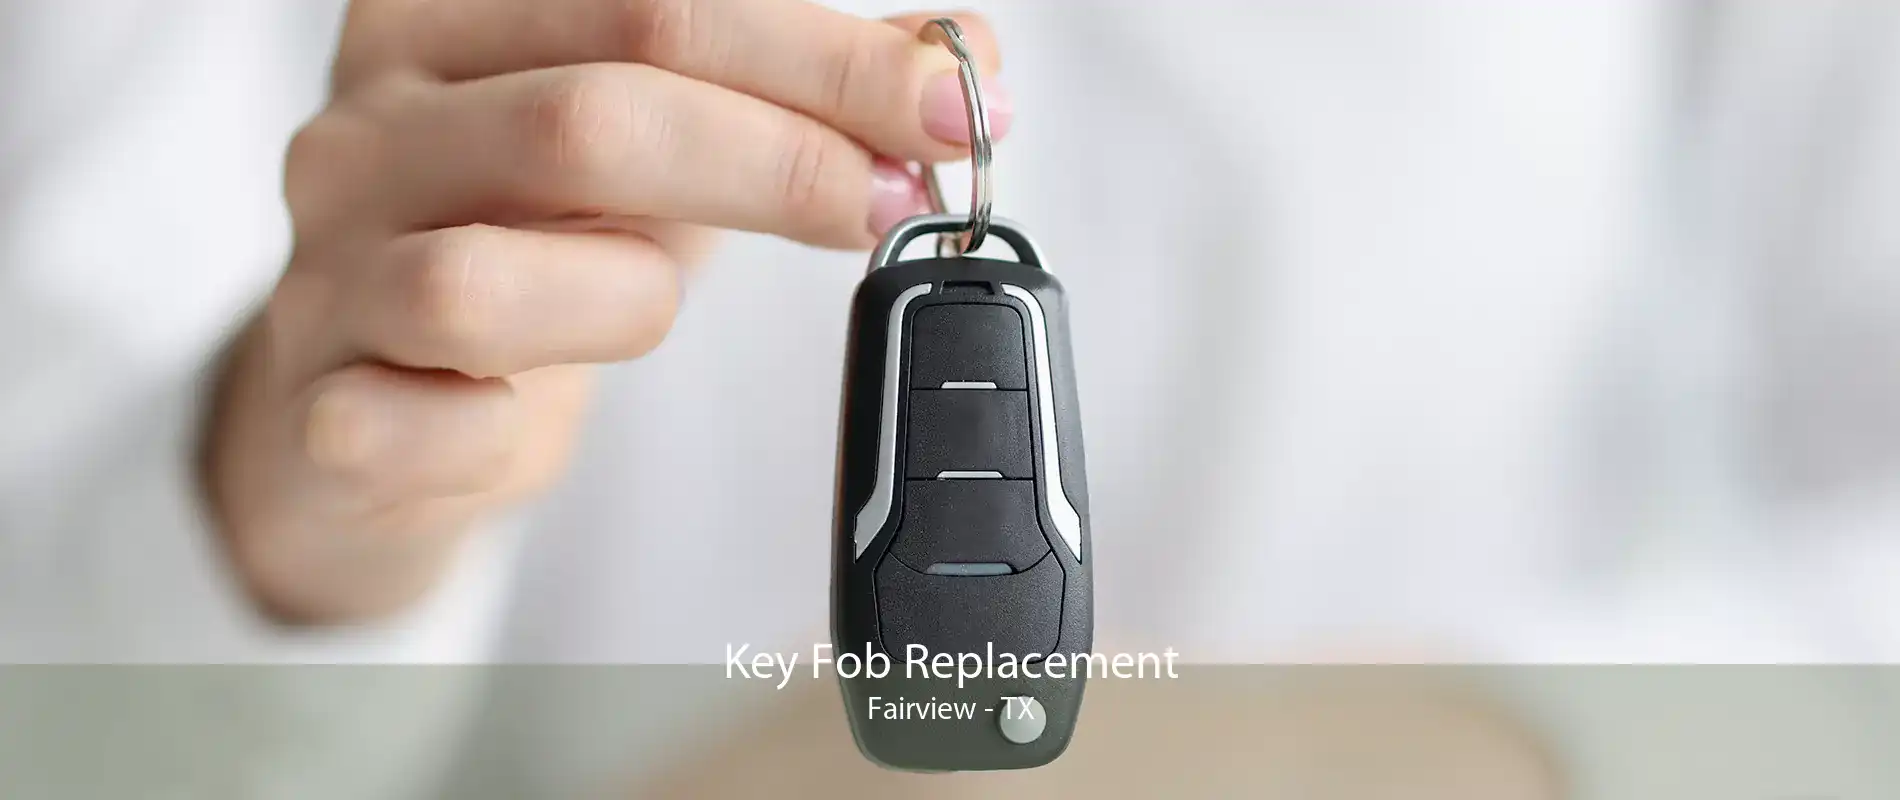 Key Fob Replacement Fairview - TX